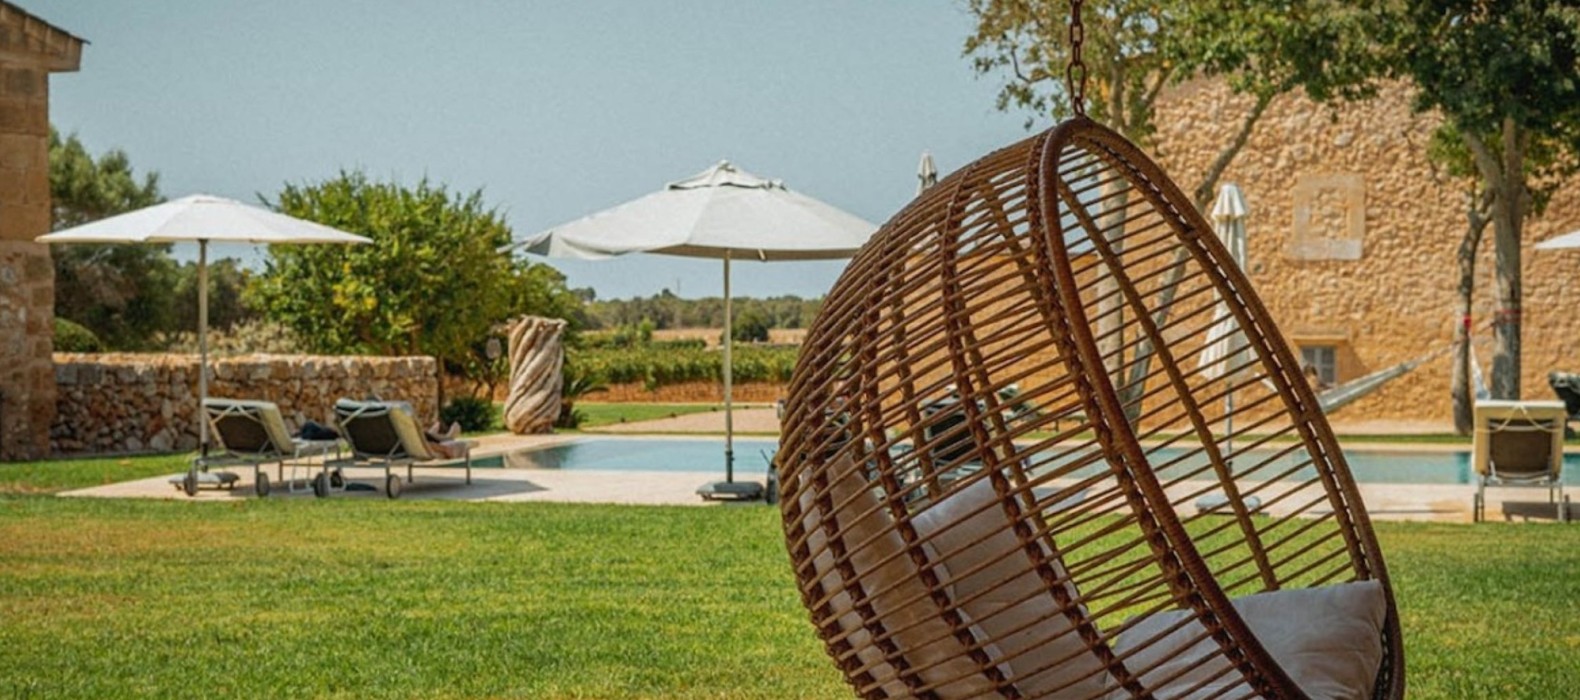 Outdoor pool area hanging chair of Finca Solene in Mallorca